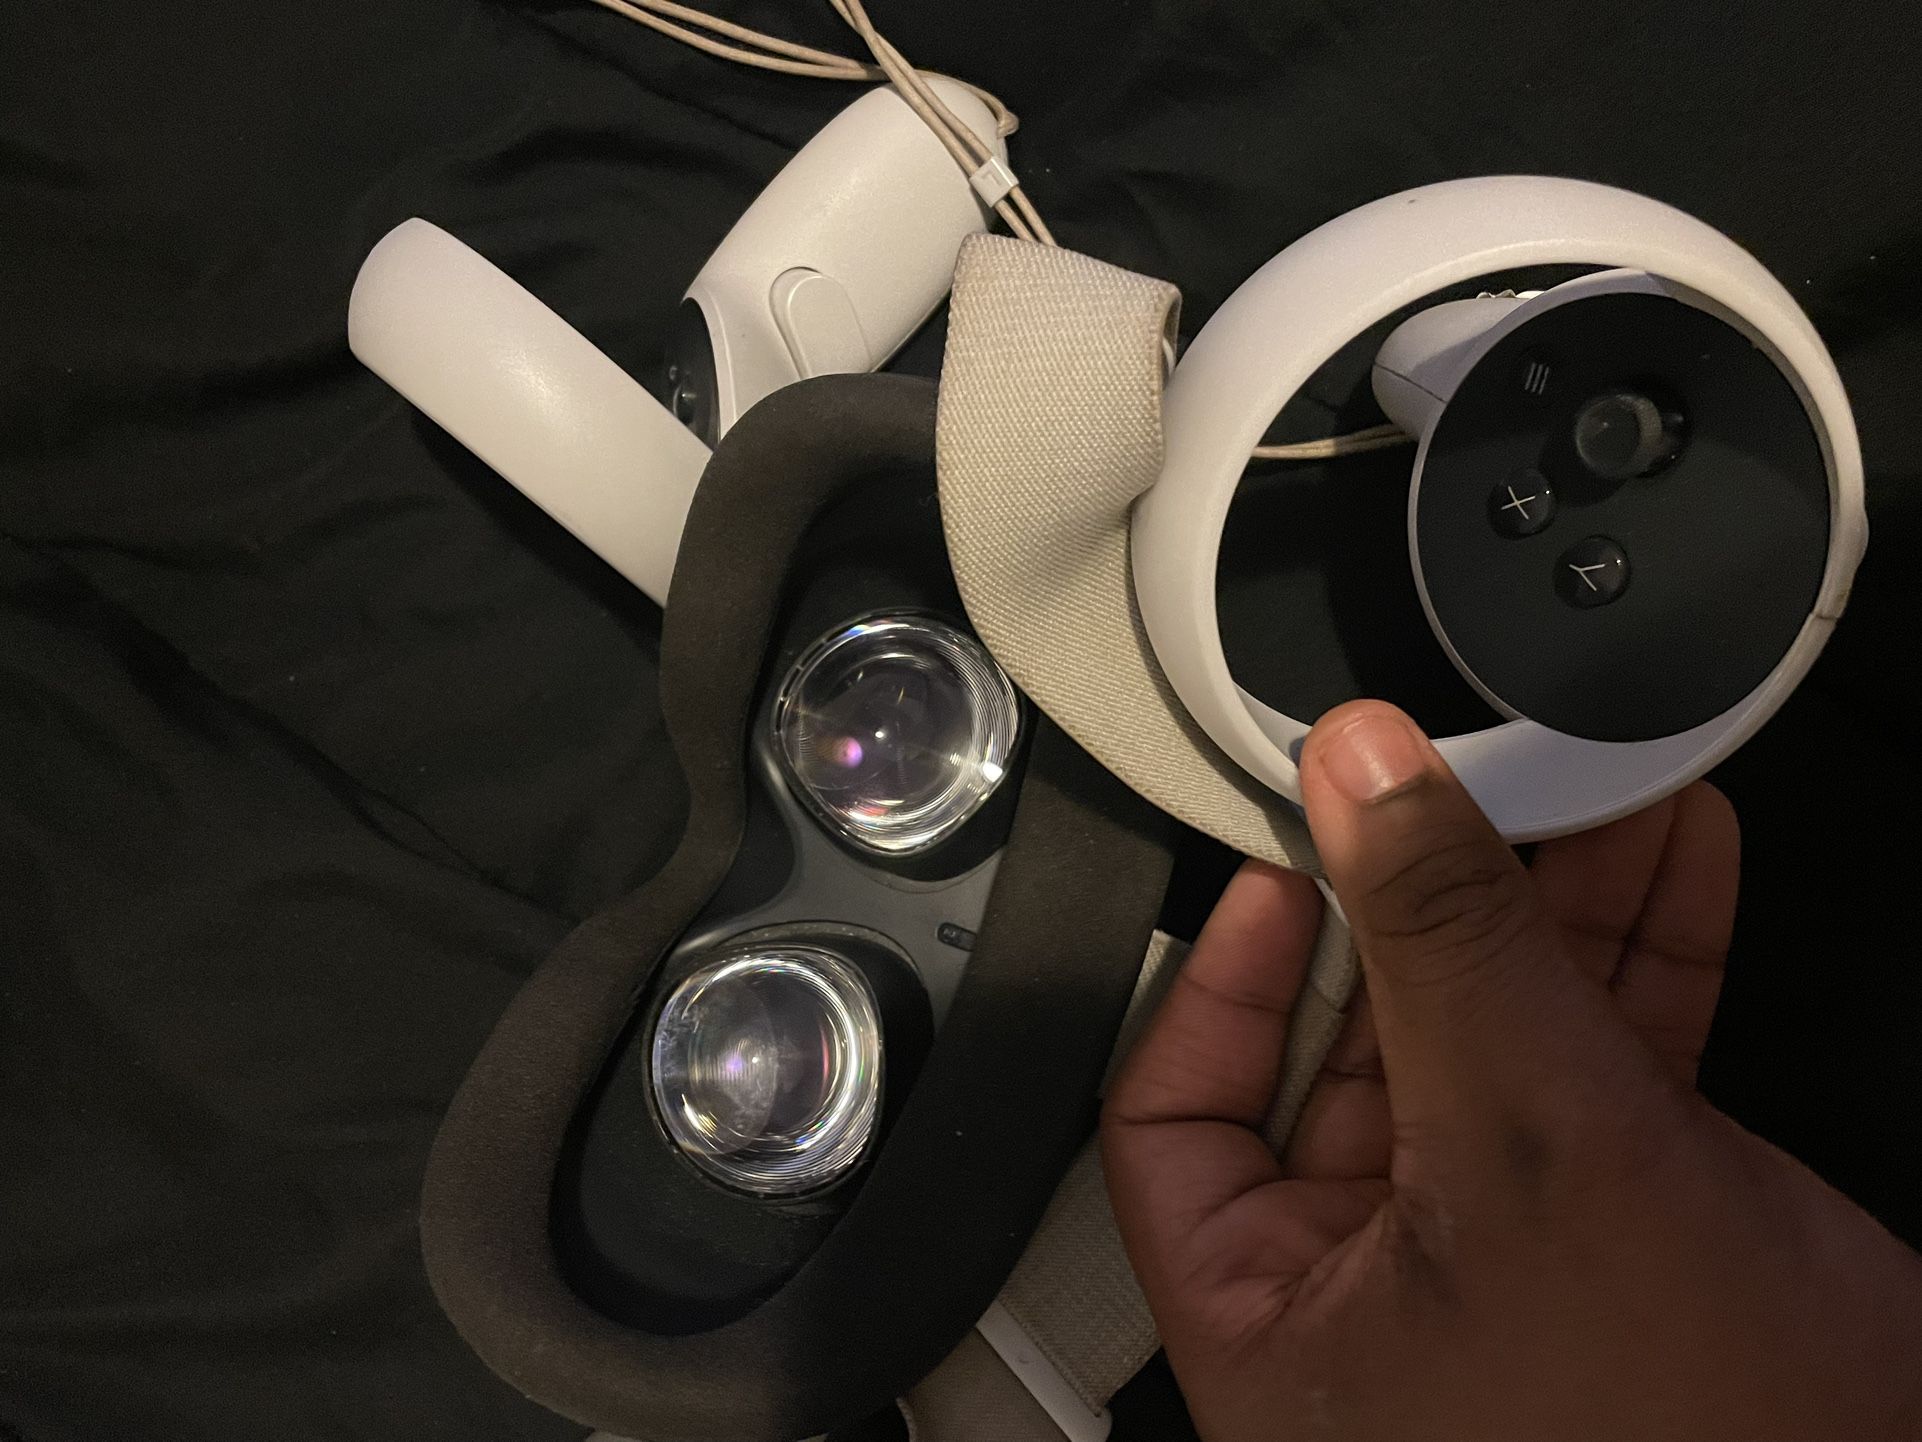 Oculus Newest Quest 2 VR Headset 